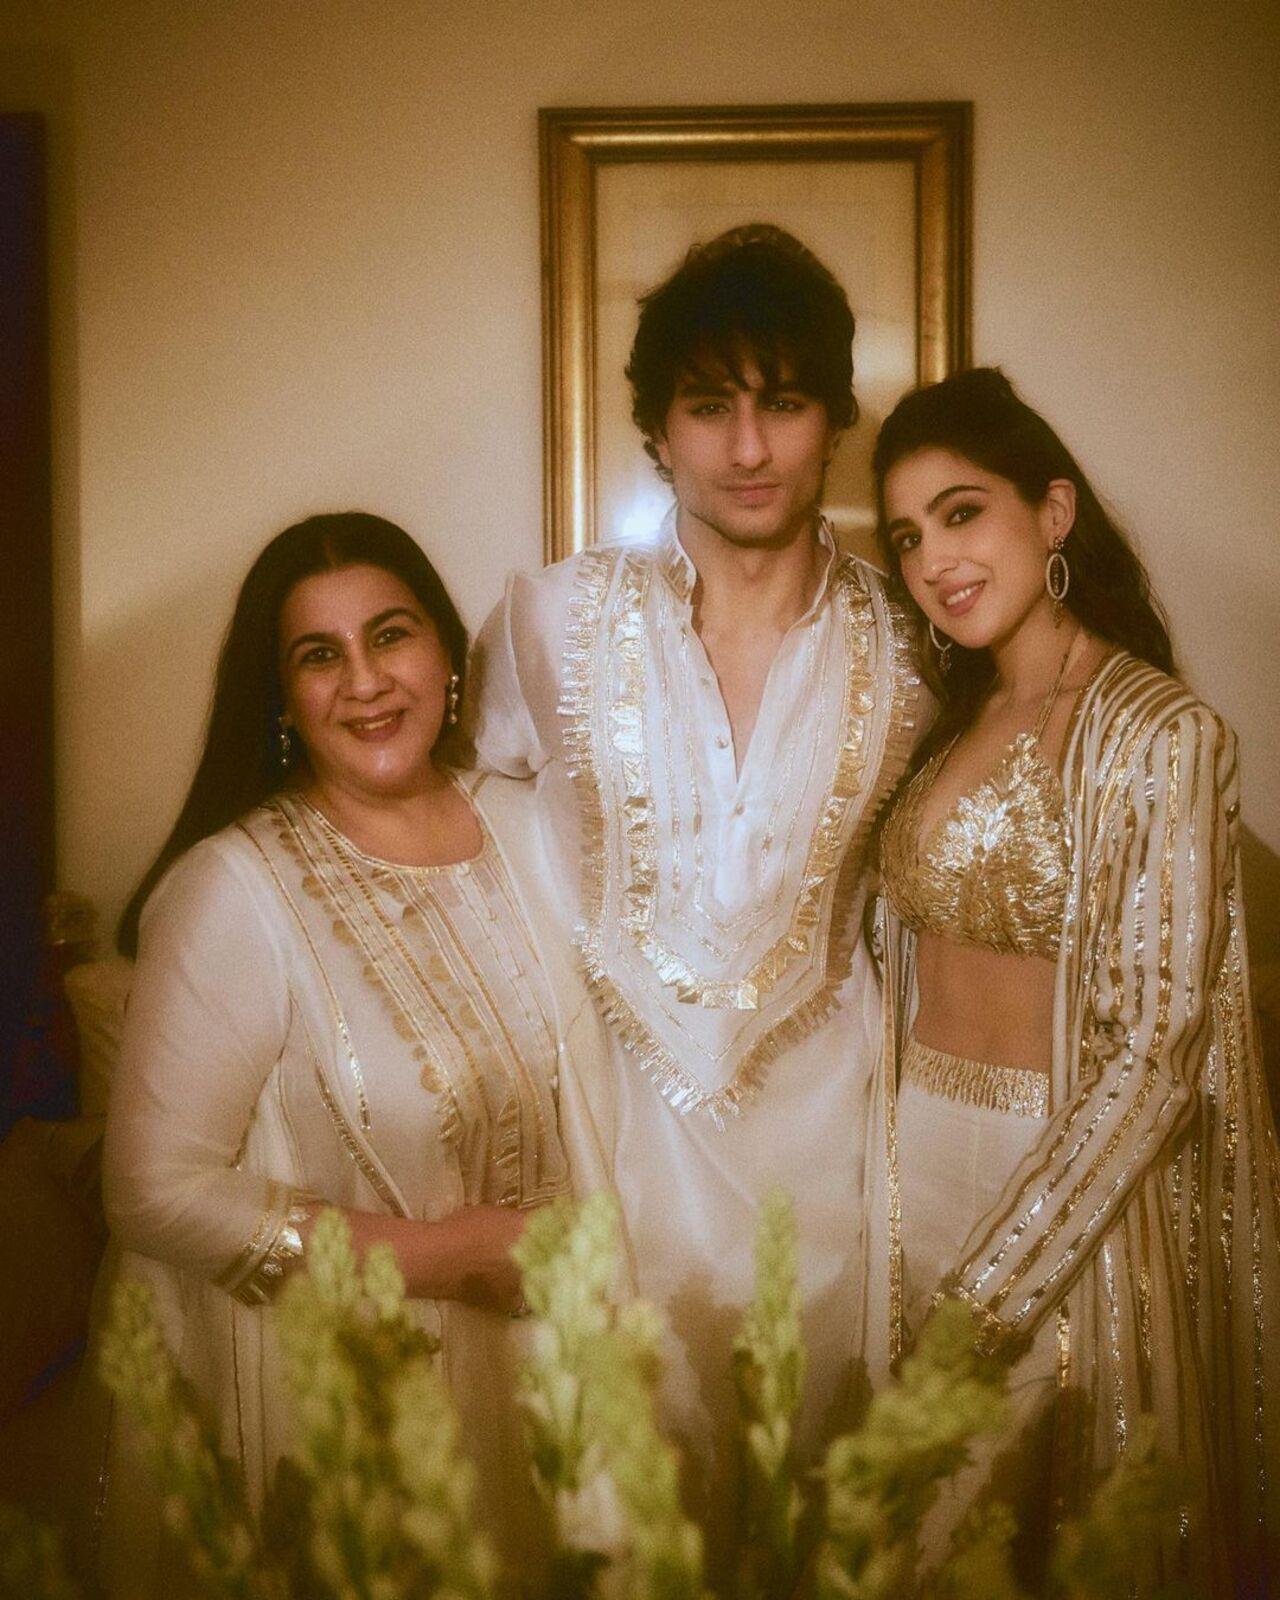 Sara Ali Khan shared a picture with her mother Amrita Singh and brother Ibrahim Ali Khan on Instagram. The pictures were clicked at their Diwali party